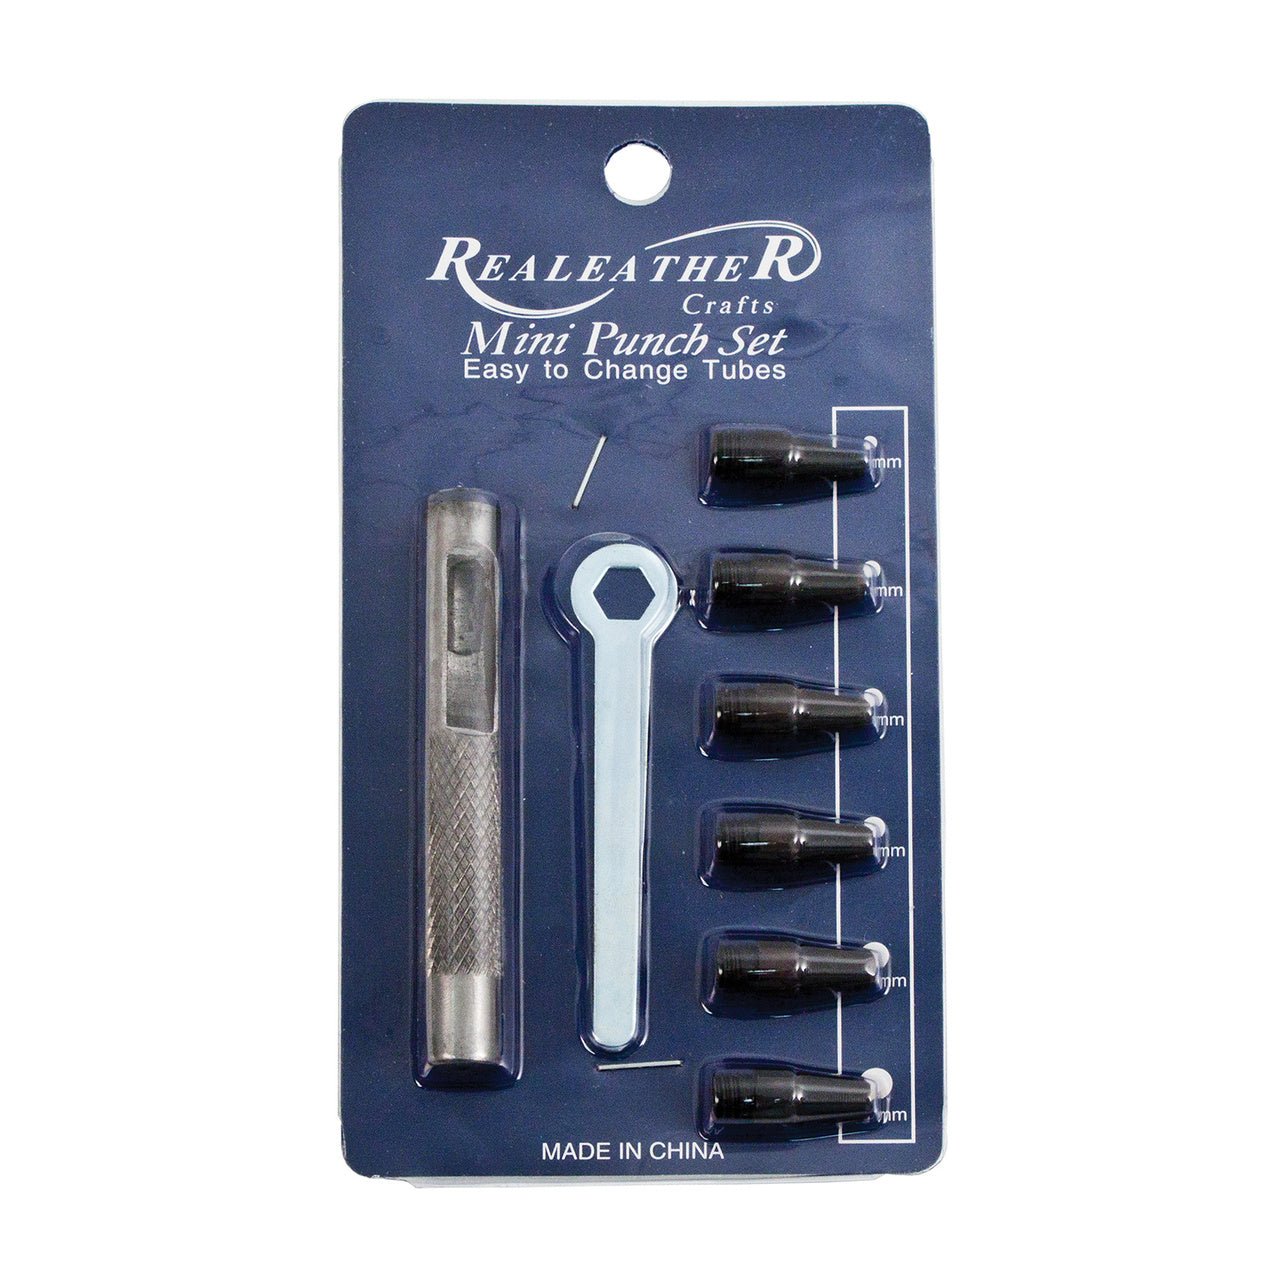 Mini Leather Punch Set - from 1/16 inch to 3/16 inch - merriartist.com